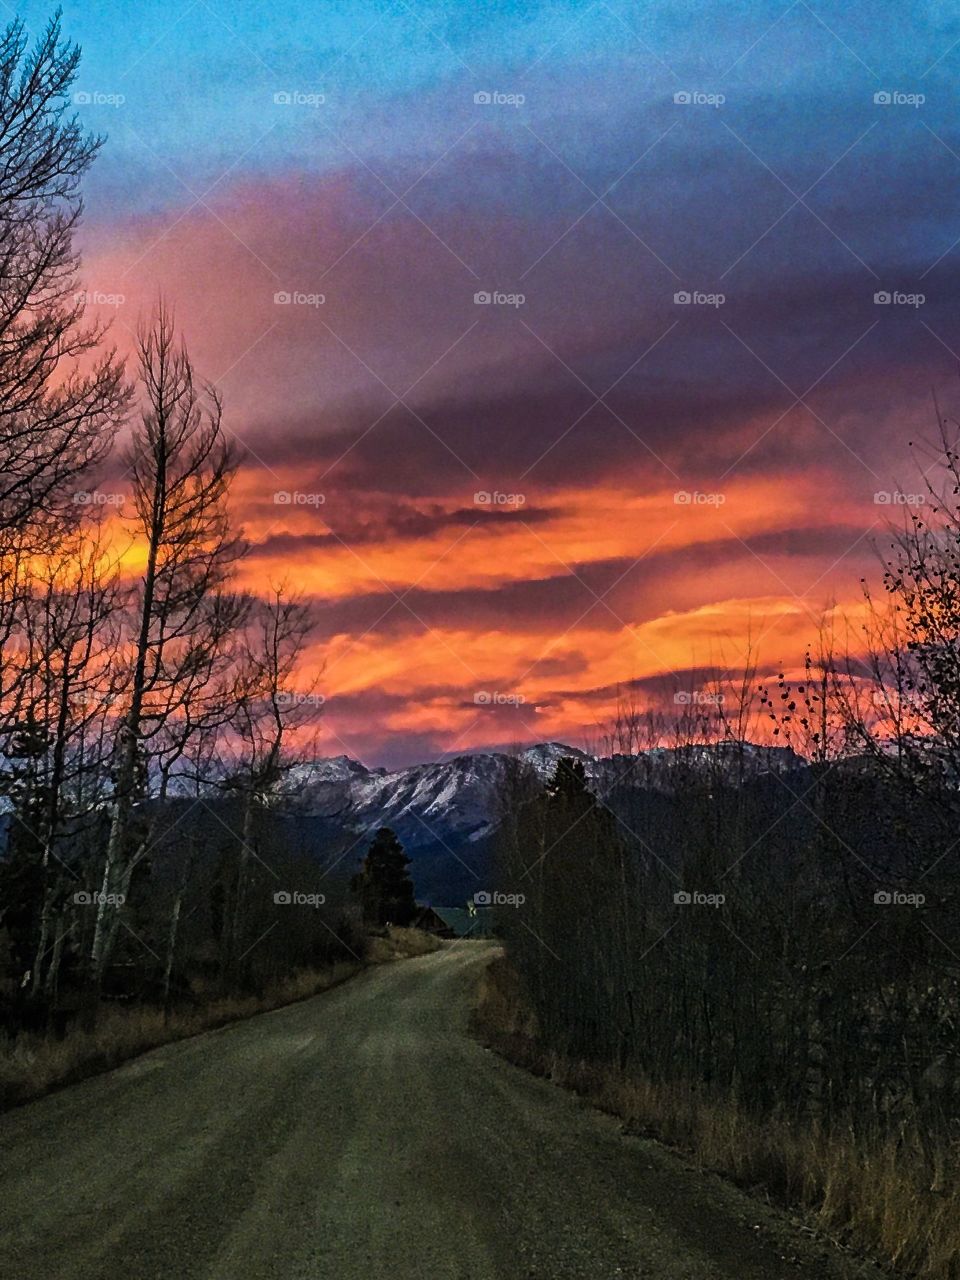 Country Road Sunset-a favorite pass time in our little mountain hometown is to drive the back roads and enjoy the scenery. It’s an activity which offers many great photo opportunities. 